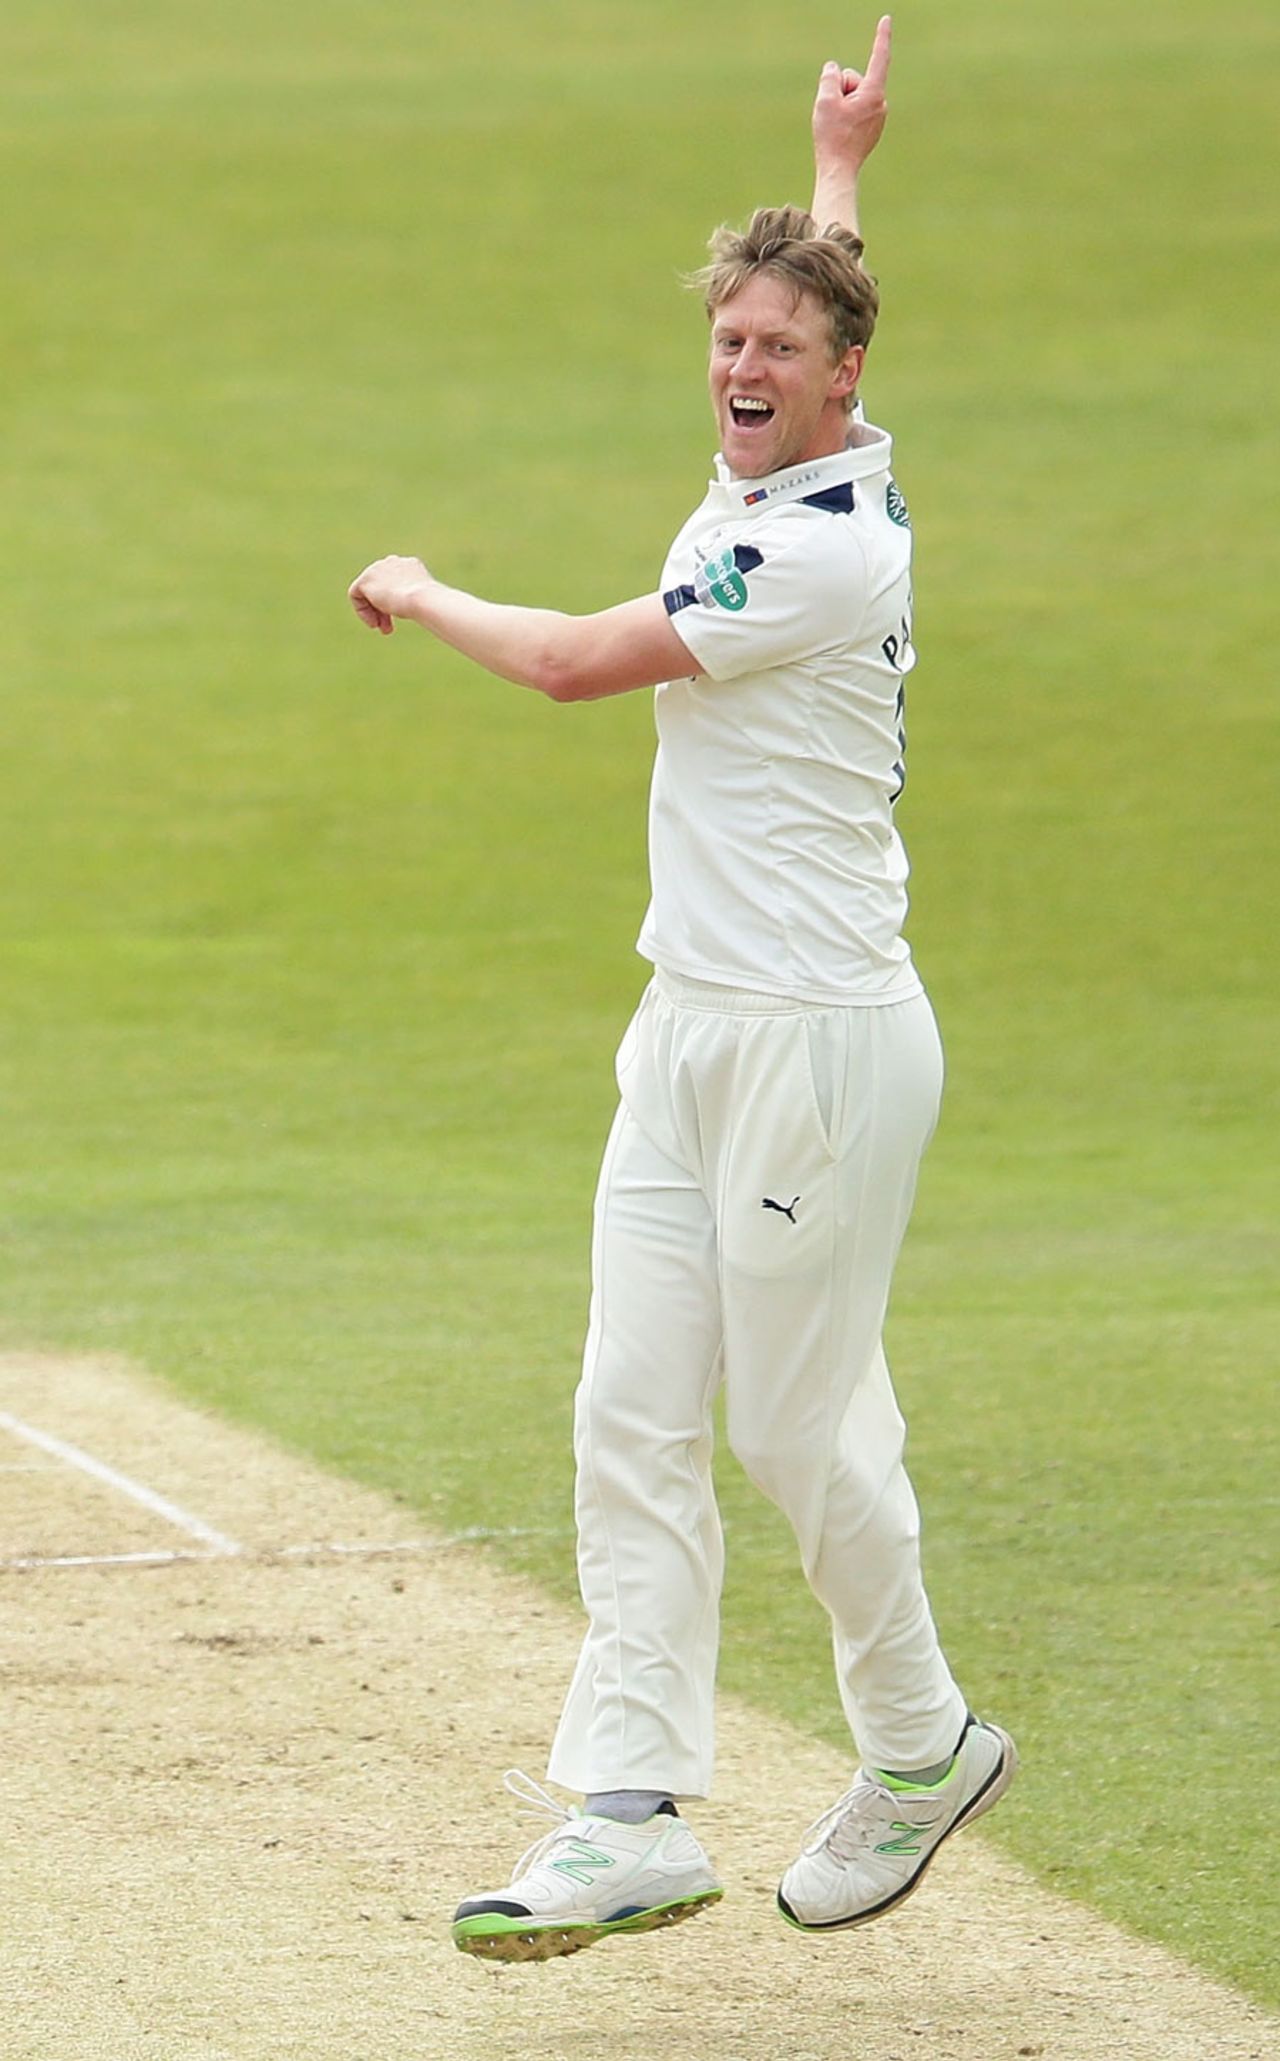 Steven Patterson made the opening breakthrough, Yorkshire v Lancashire, County Championship, Division One, Headingley, 2nd day, May 30, 2016